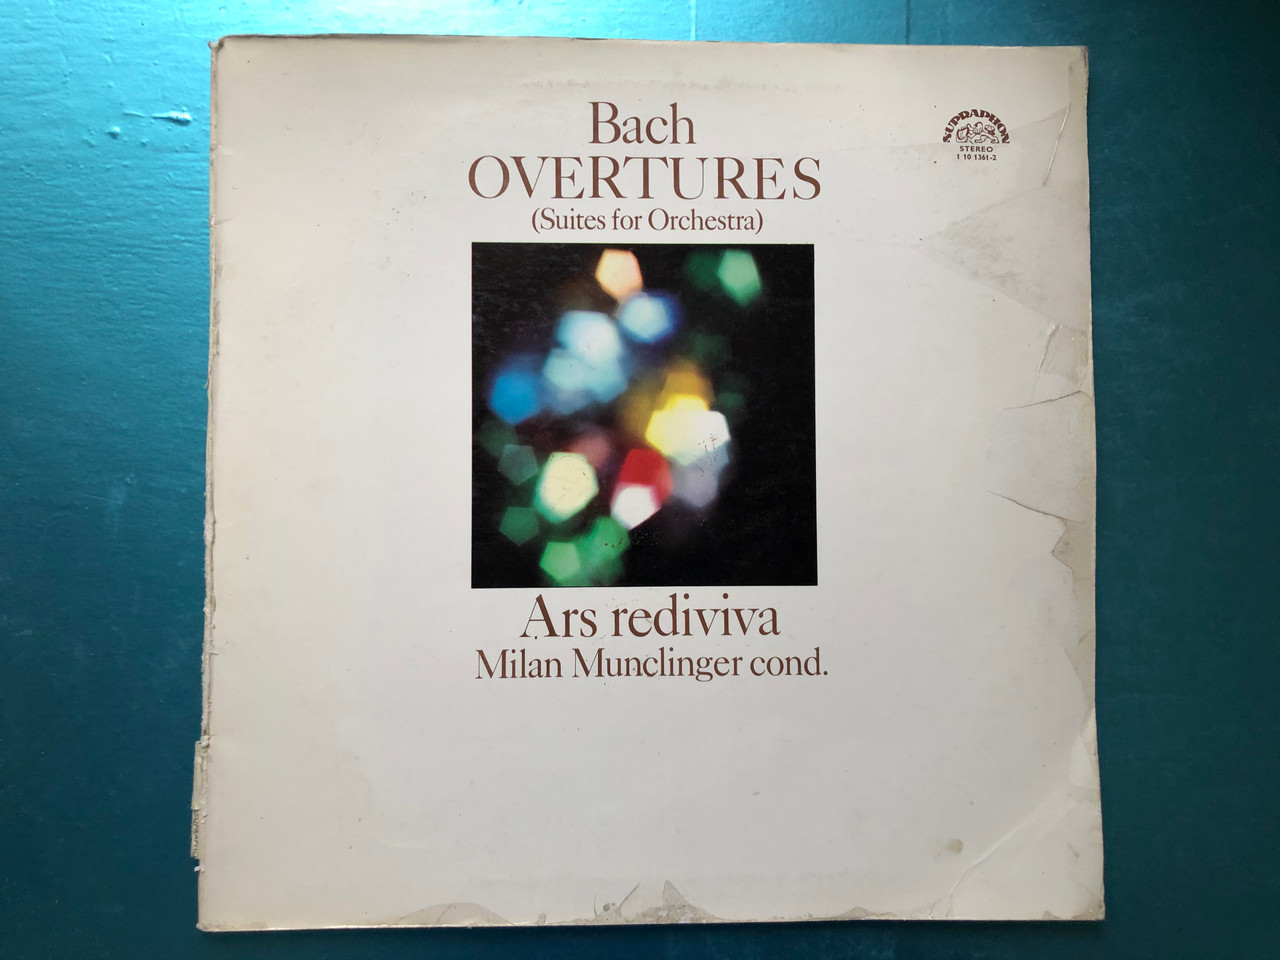 https://cdn10.bigcommerce.com/s-62bdpkt7pb/products/30482/images/180250/Bach_-_Overtures_Suites_For_Orchestra_Ars_Rediviva_Milan_Munclinger_cond._Supraphon_2x_LP_1973_Stereo_1_10_1361-2_1__09976.1622792512.1280.1280.JPG?c=2&_ga=2.170983590.700277554.1623167661-252145610.1623167661